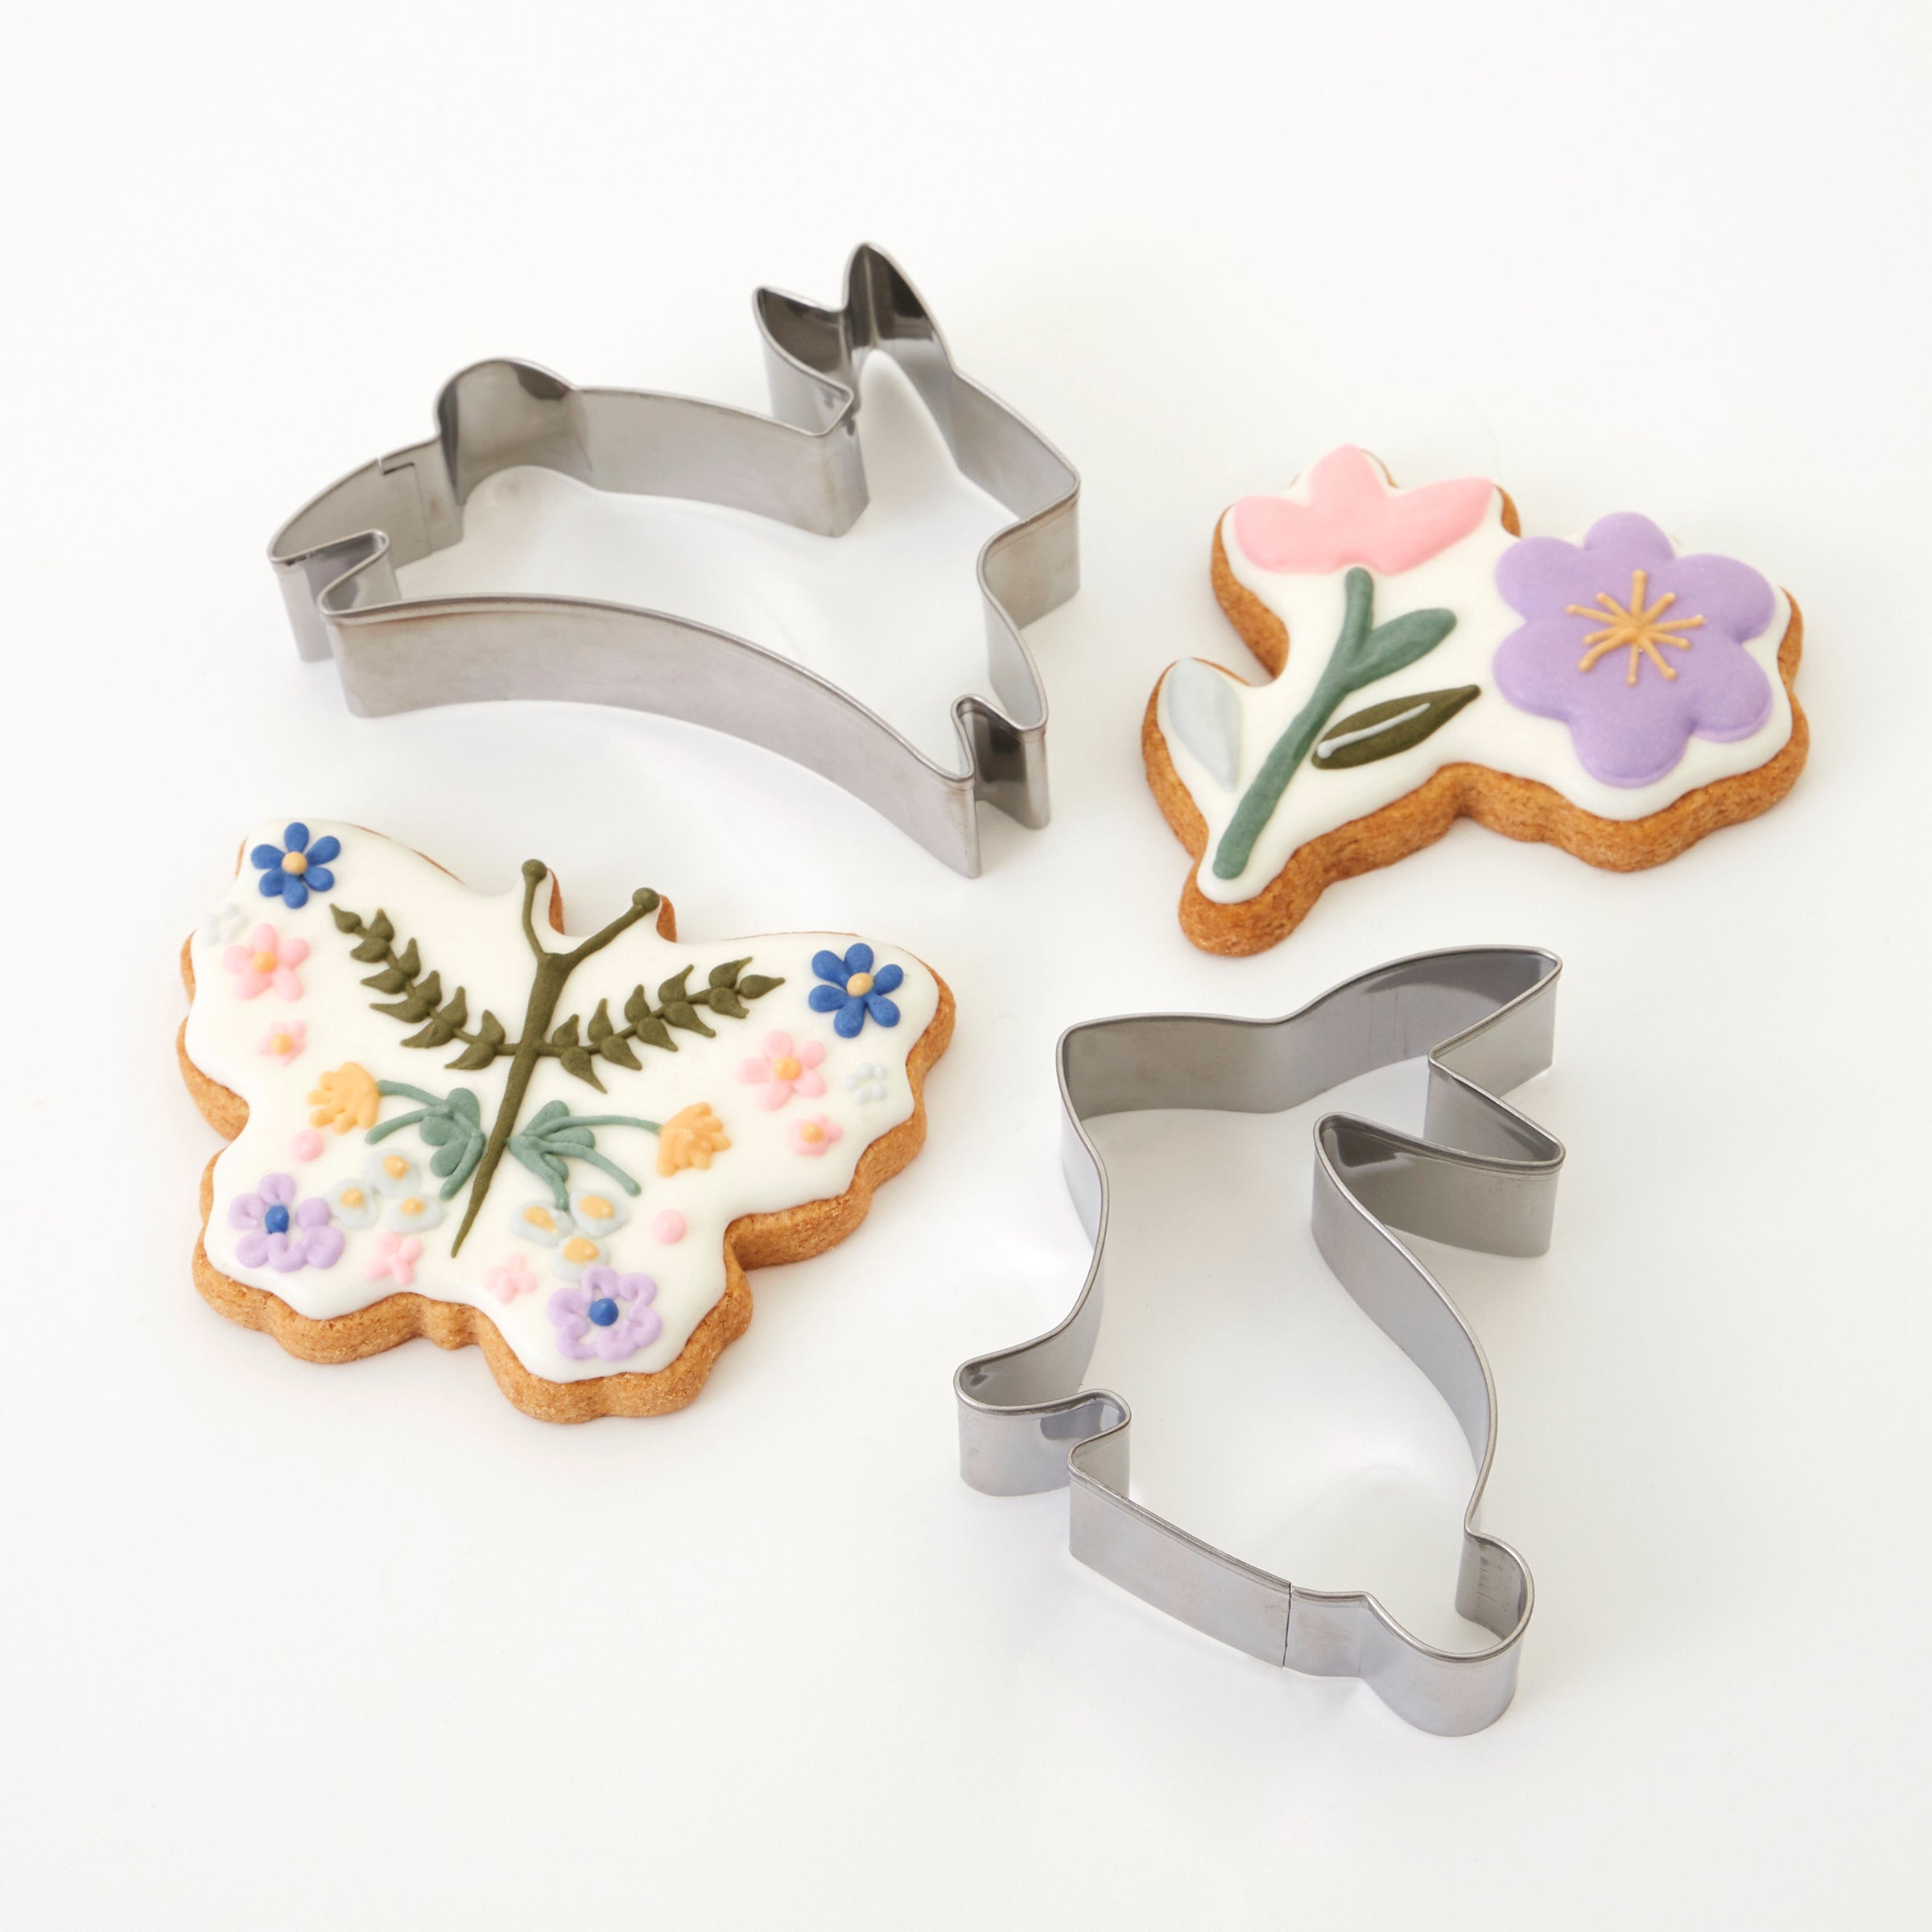 Our Easter cookie cutters are perfect as an Easter gift, and to make the most amazing Easter cookies.